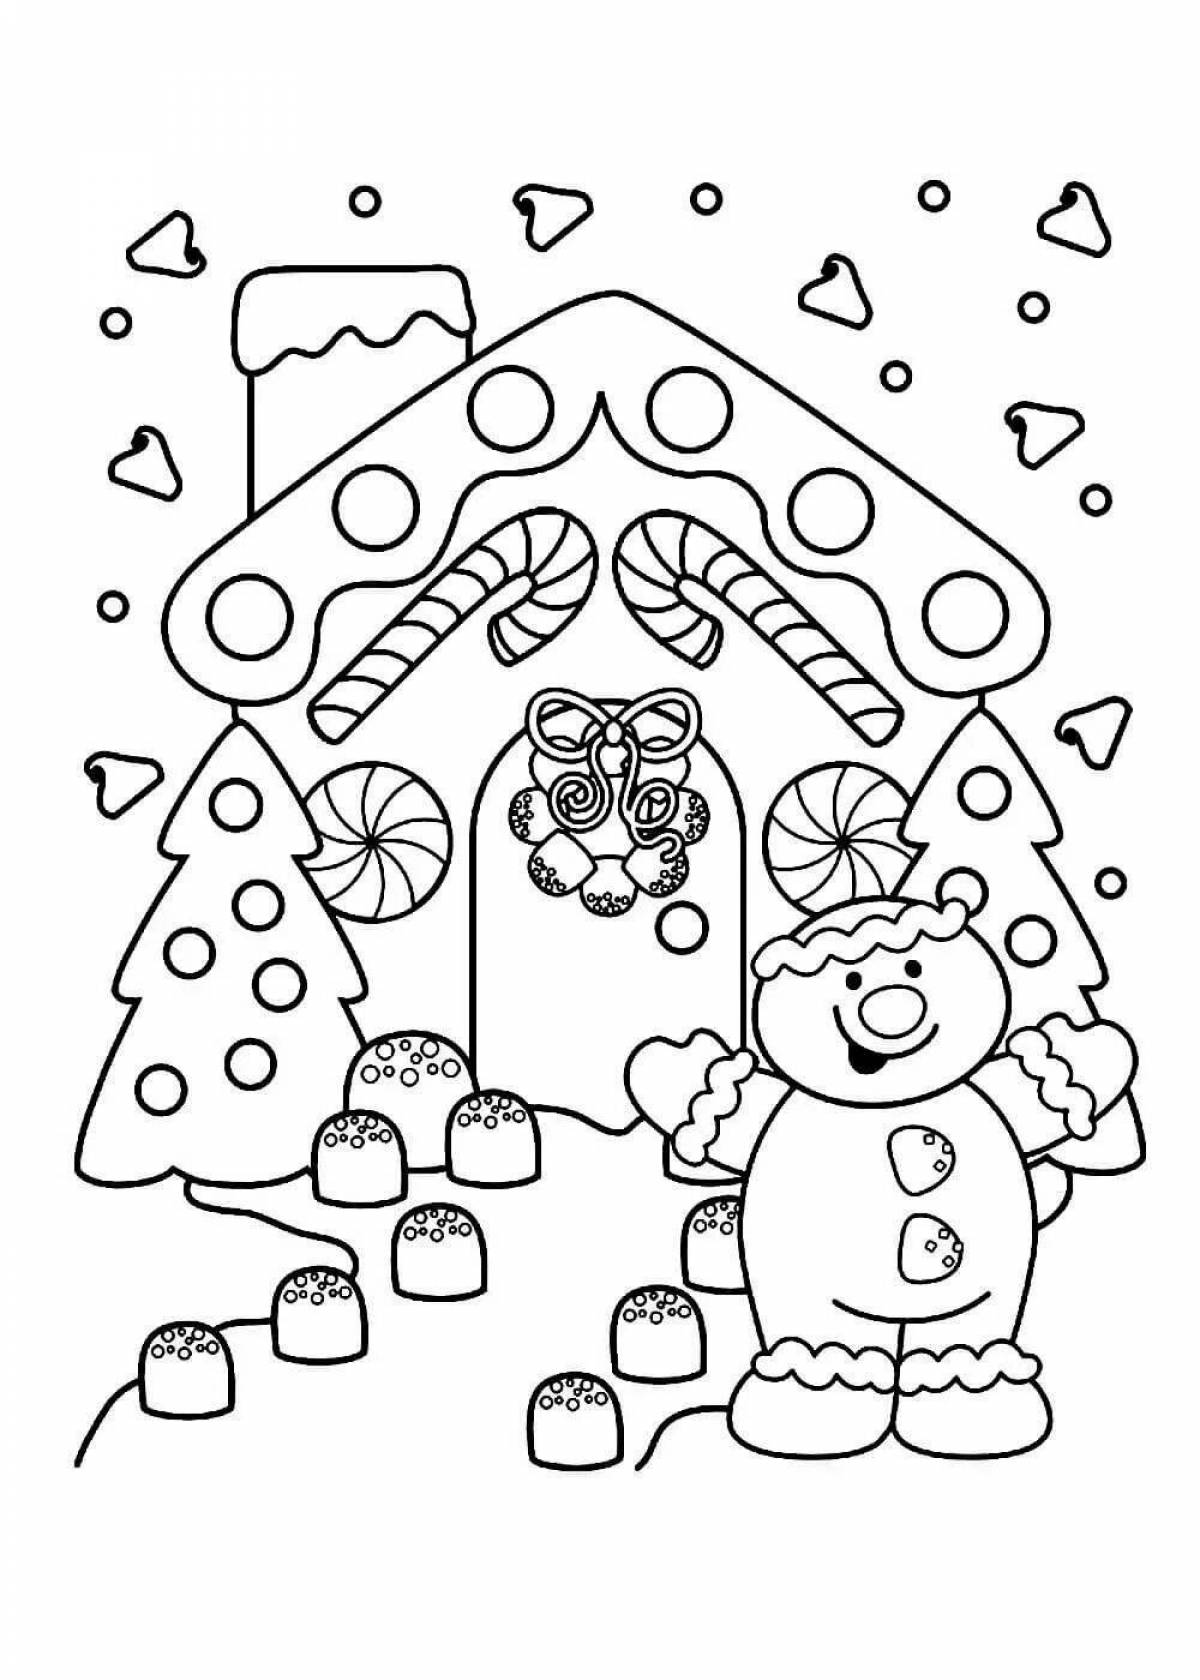 Colouring a joyful house for the new year